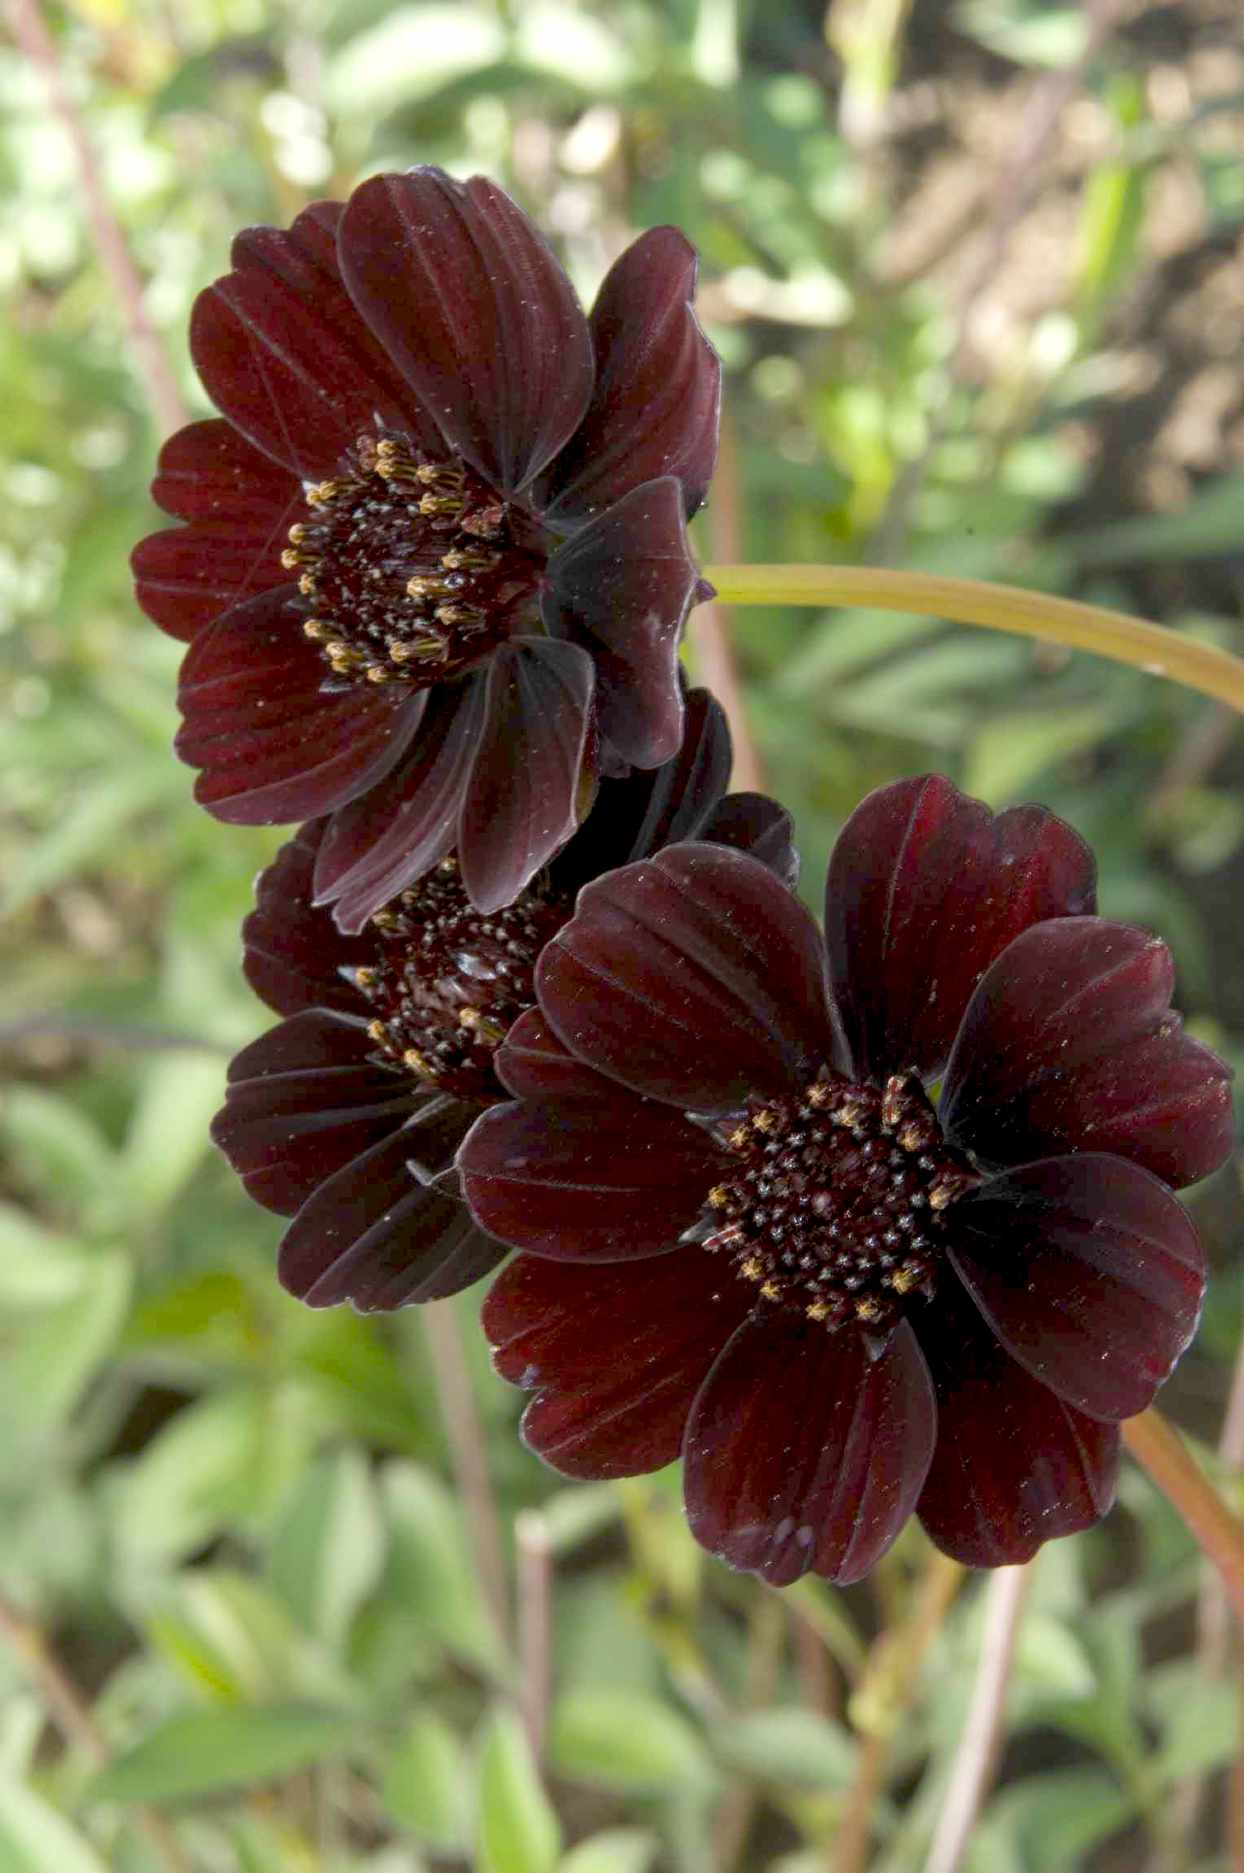 Chocolate Cosmos flowers in a garden